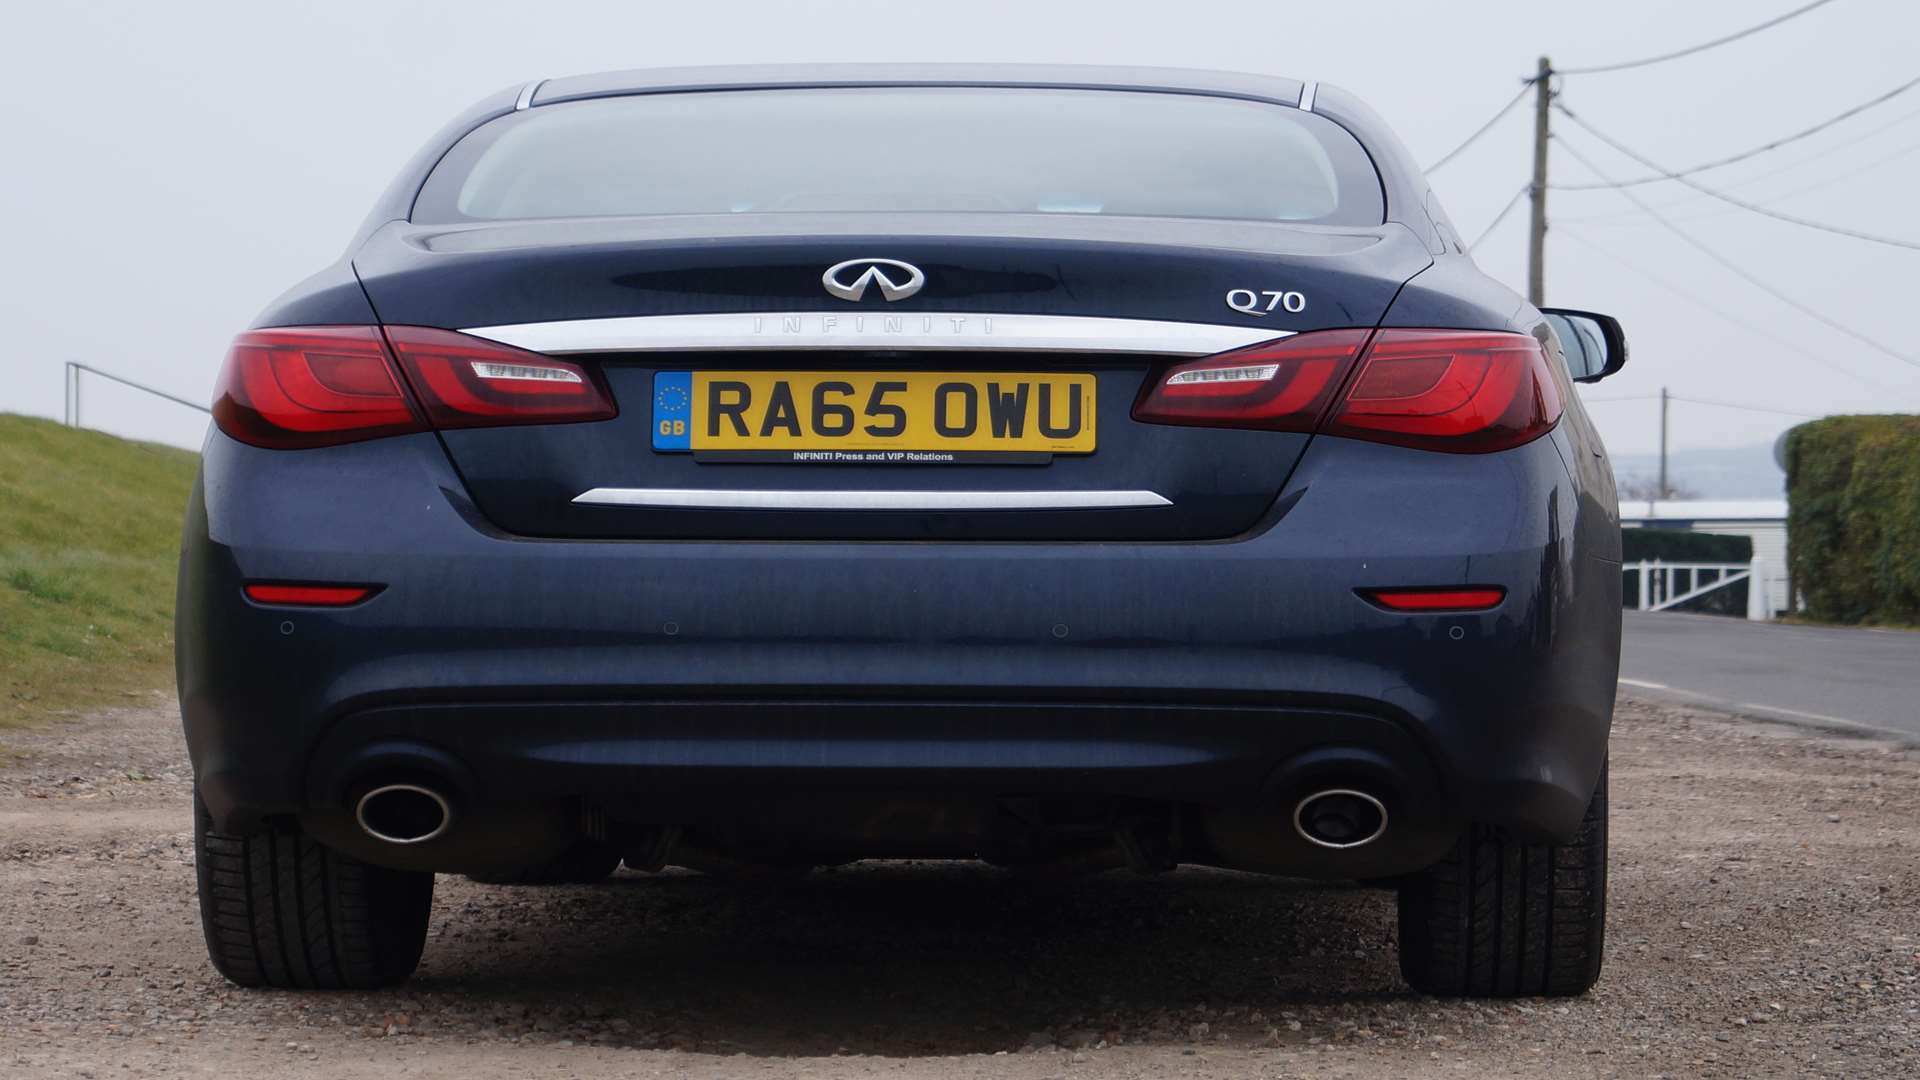 The rear is dominated by large tail light clusters joined by a broad chrome strip while under the bumper sit two fat exhaust pipes